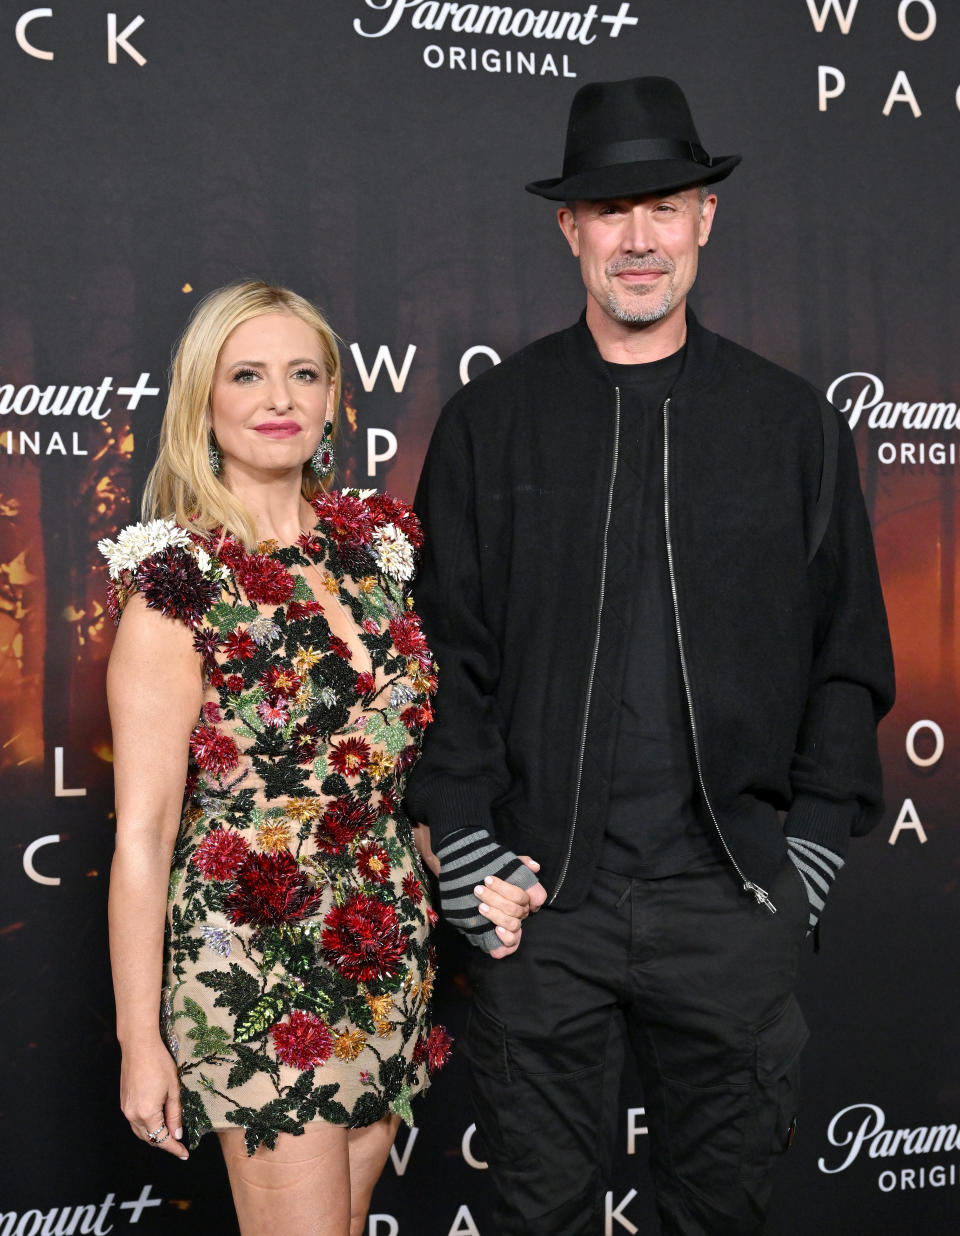 LOS ANGELES, CALIFORNIA - JANUARY 19: Sarah Michelle Gellar and Freddie Prinze Jr. attend the Los Angeles Premiere of Paramount+'s  "Wolf Pack" at Harmony Gold on January 19, 2023 in Los Angeles, California. (Photo by Axelle/Bauer-Griffin/FilmMagic)